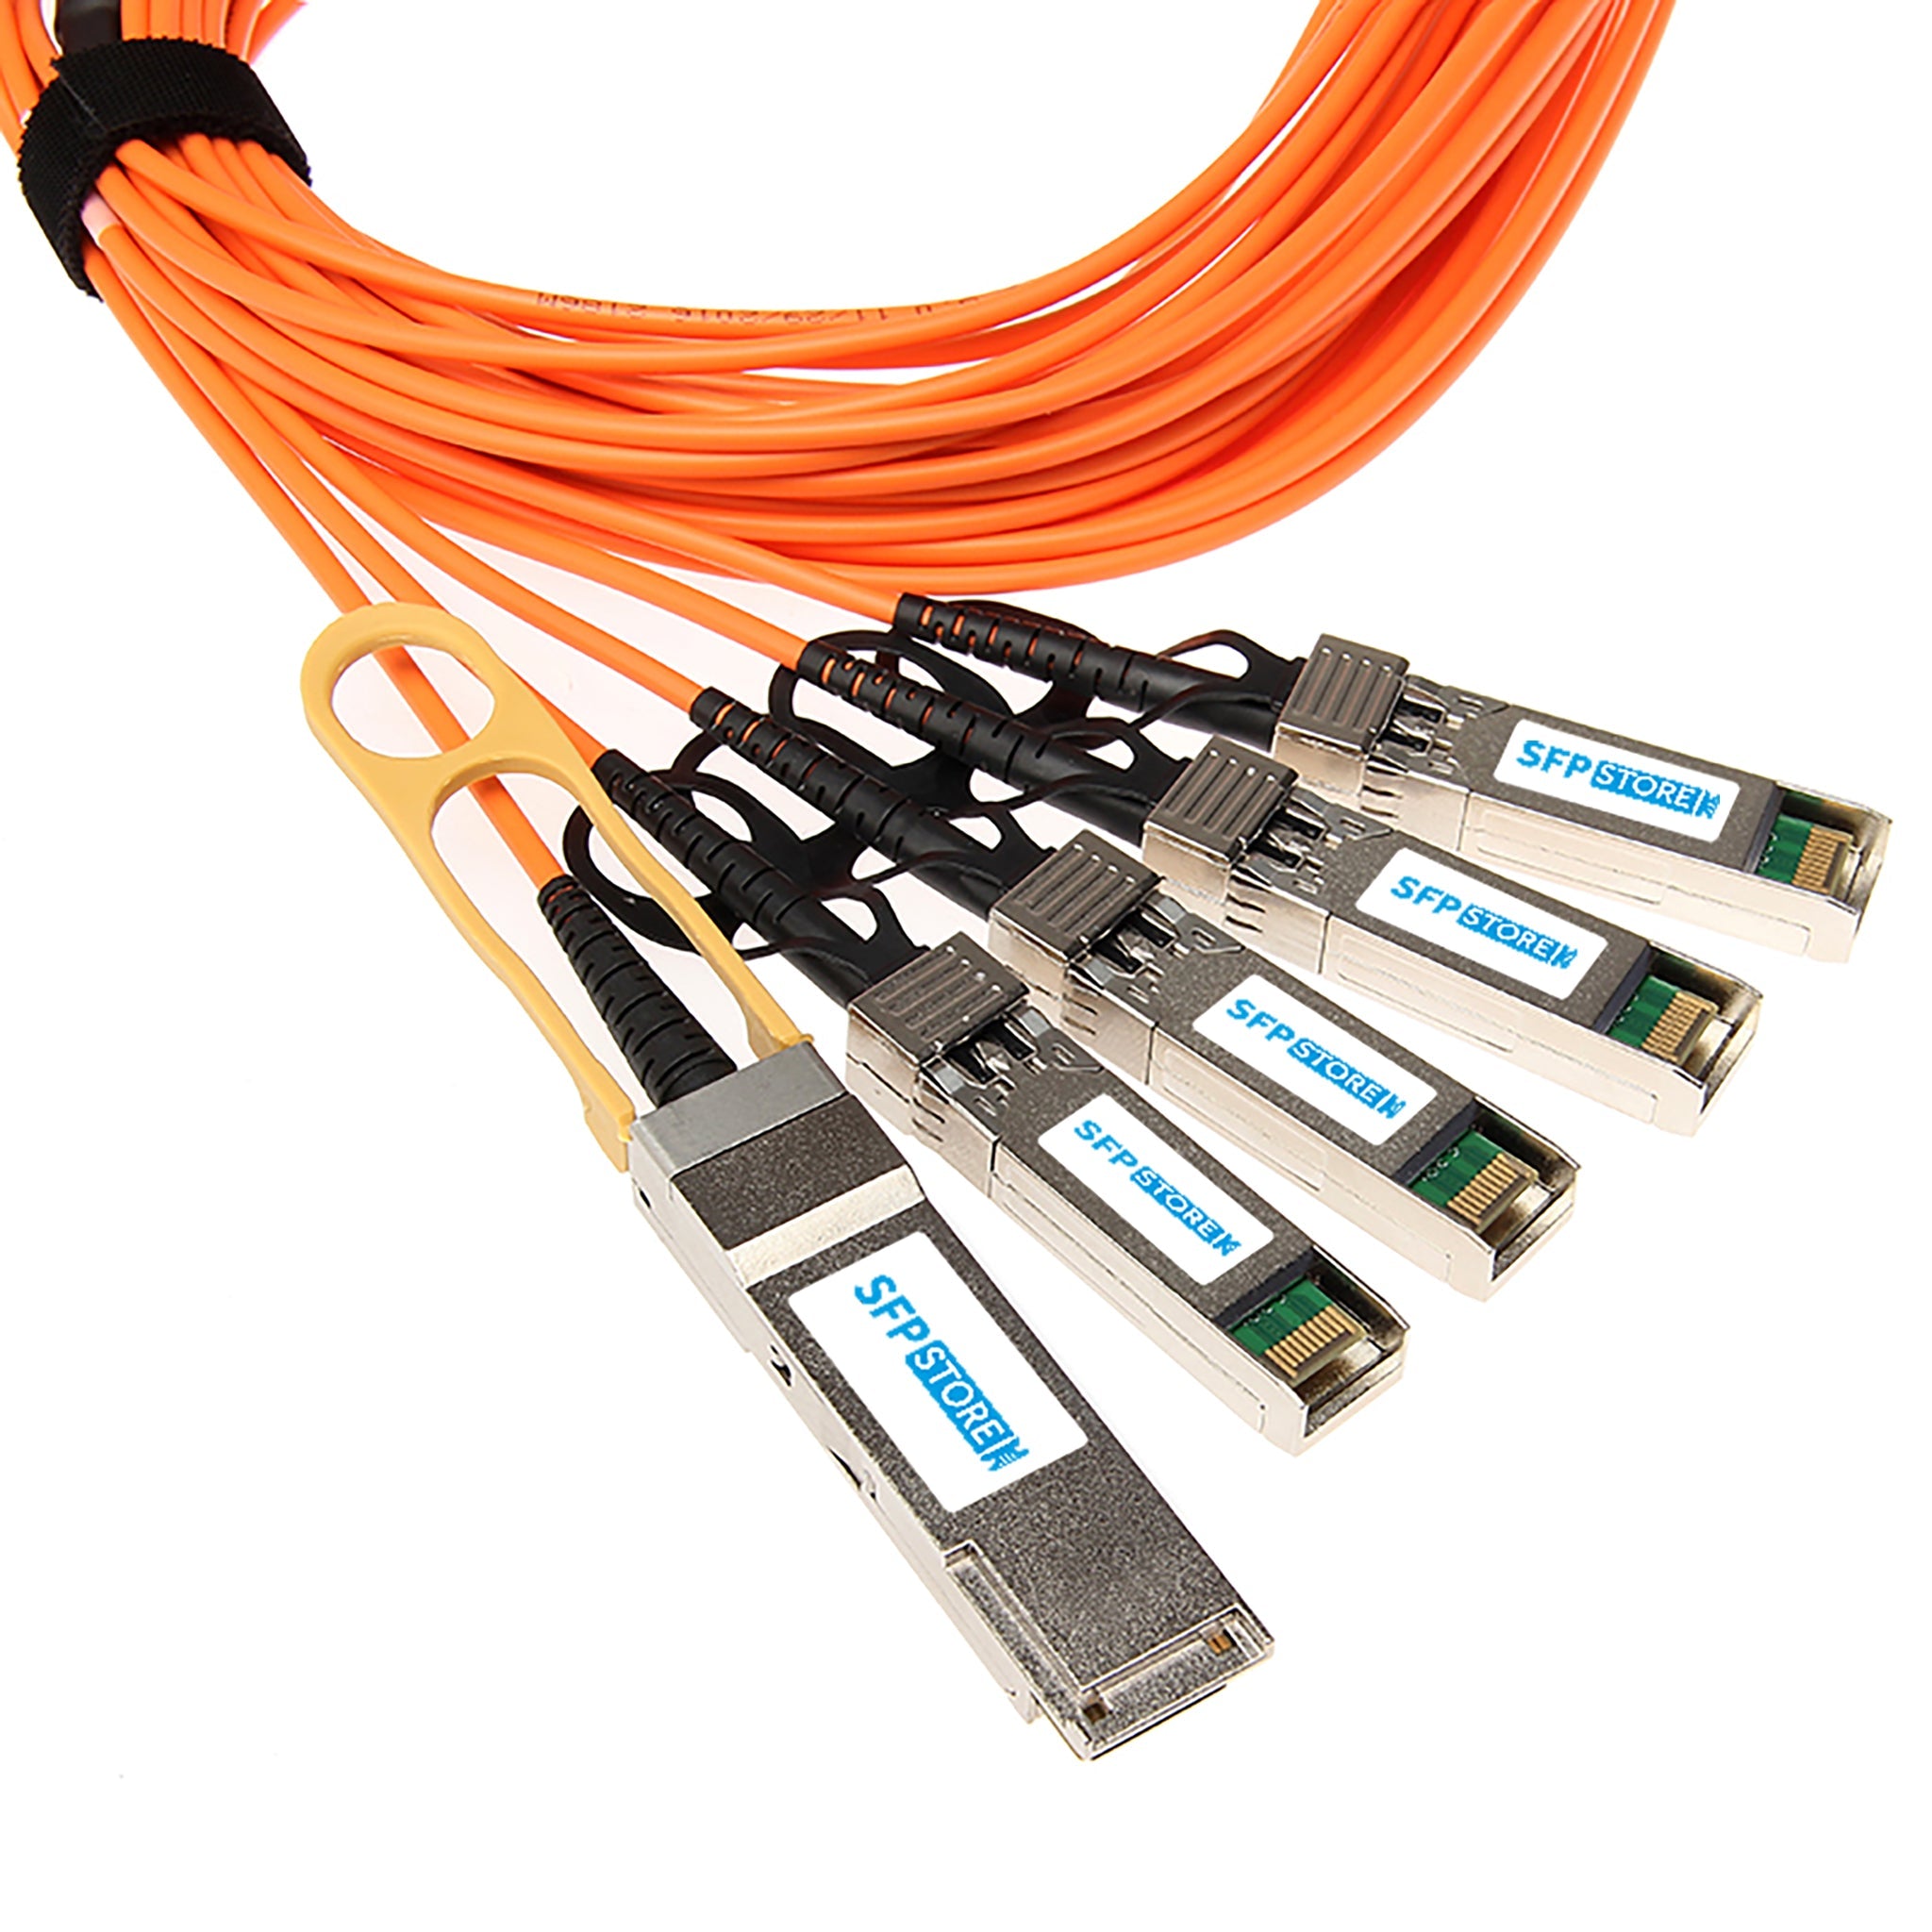 AOC-QSFP-4SFP-10G-1M-C - 1m Dell Compatible 40G QSFP+ to 4 x 10G SFP+ Active Optical Cable